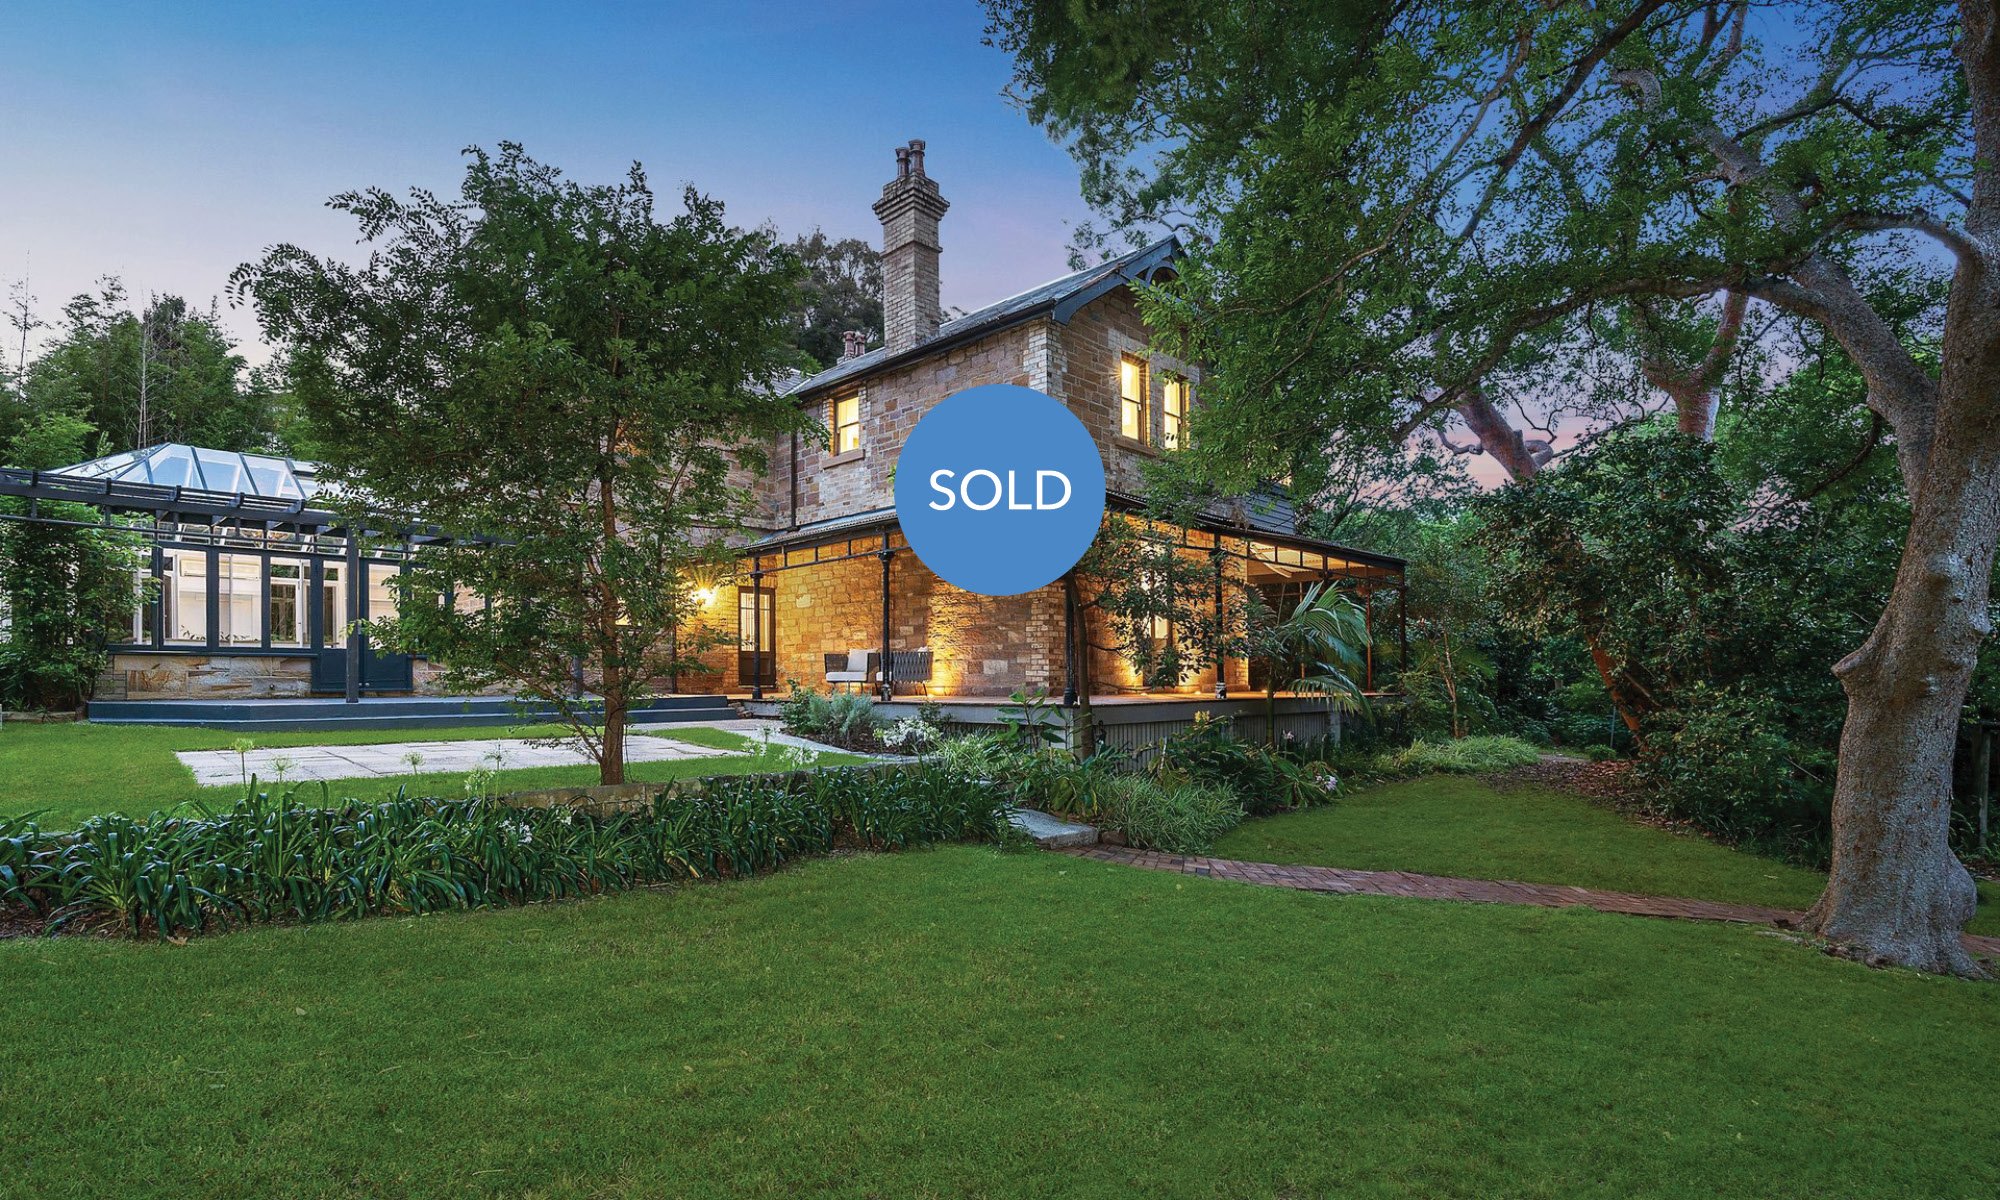 How a repairs strategy added $1.2 million to the sale price of Cremorne property